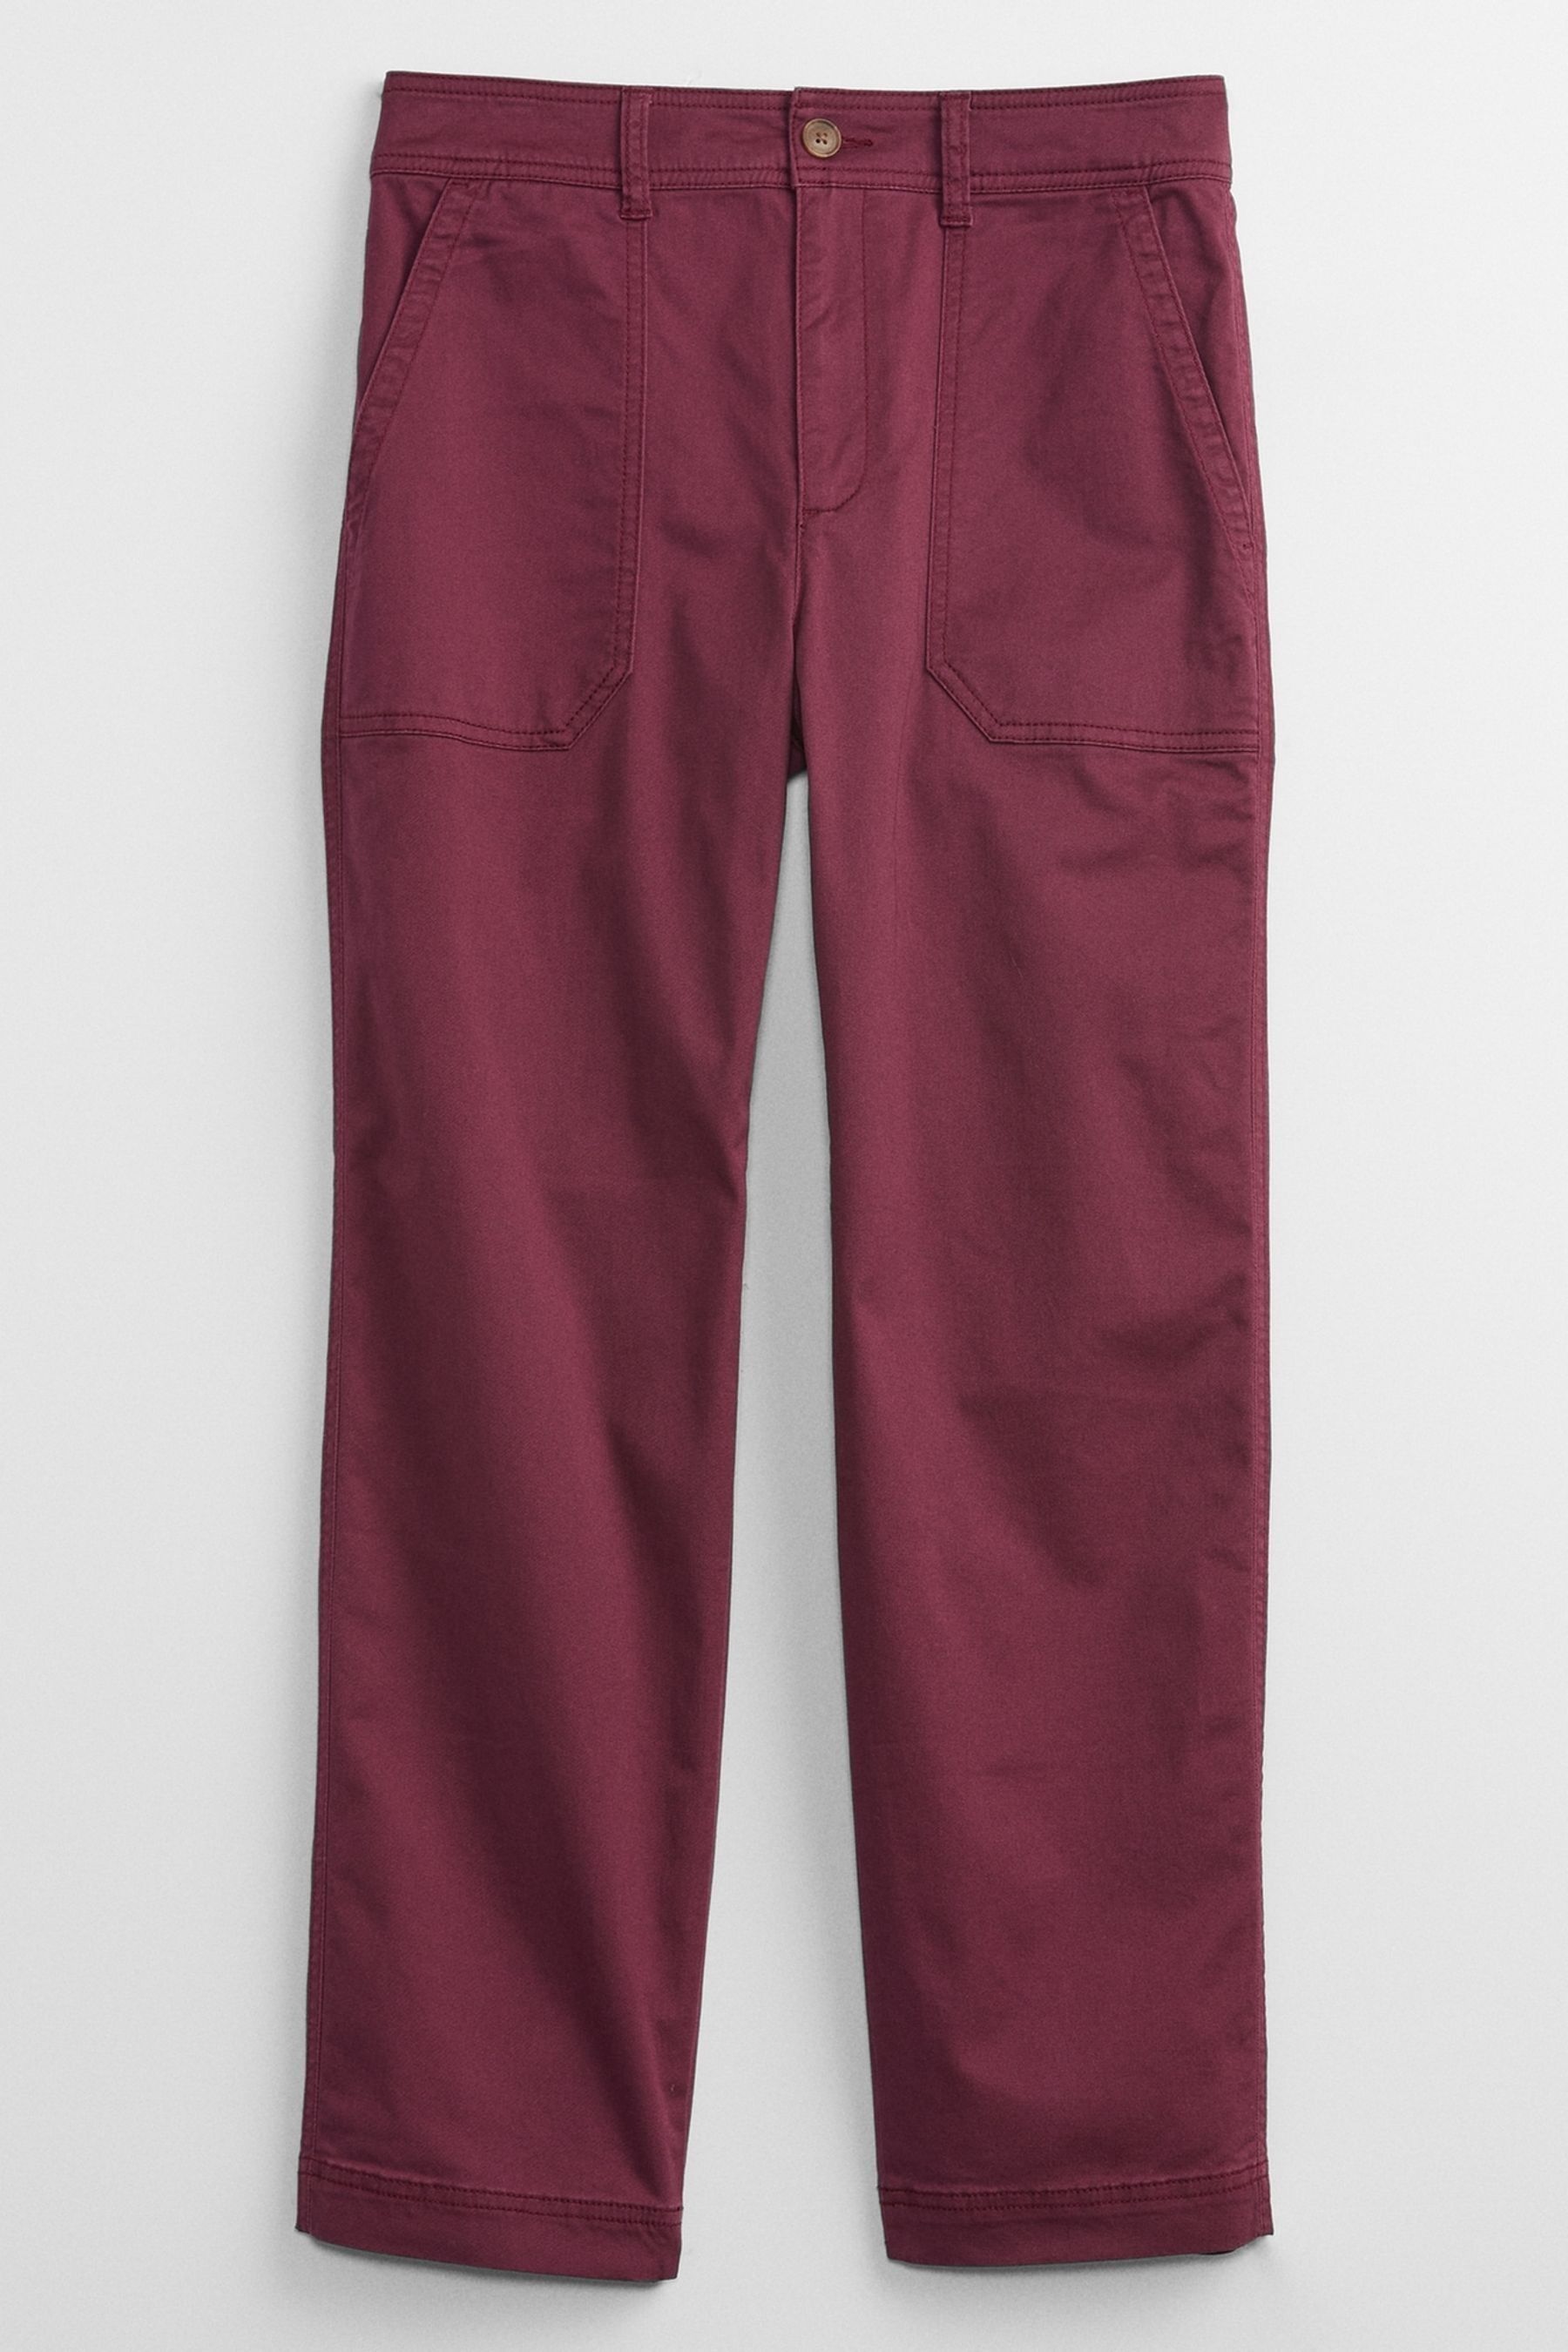 Buy Purple High Rise Girlfriend Utility Chinos from the Gap online shop